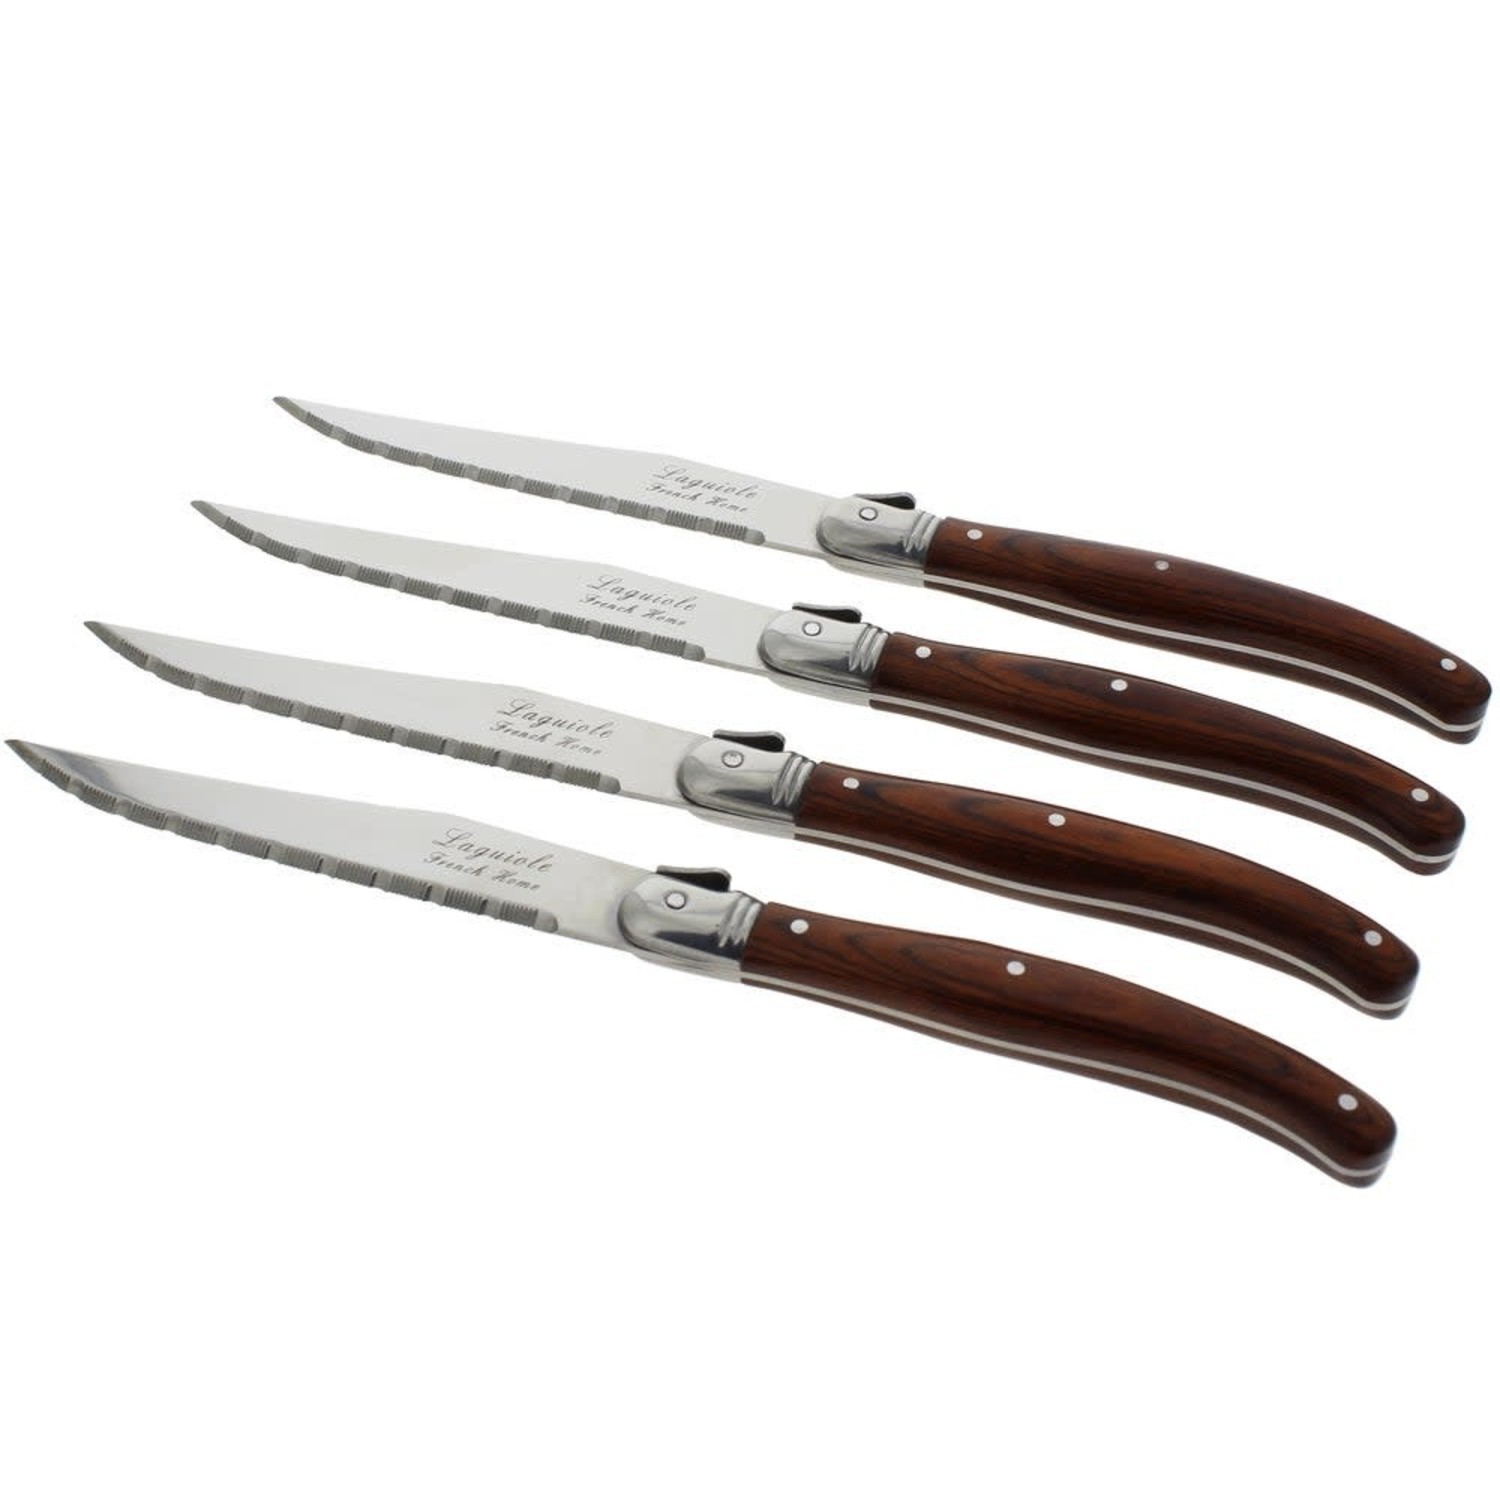 Rosewood Laguiole Steak Knives, set of 4 - Whisk